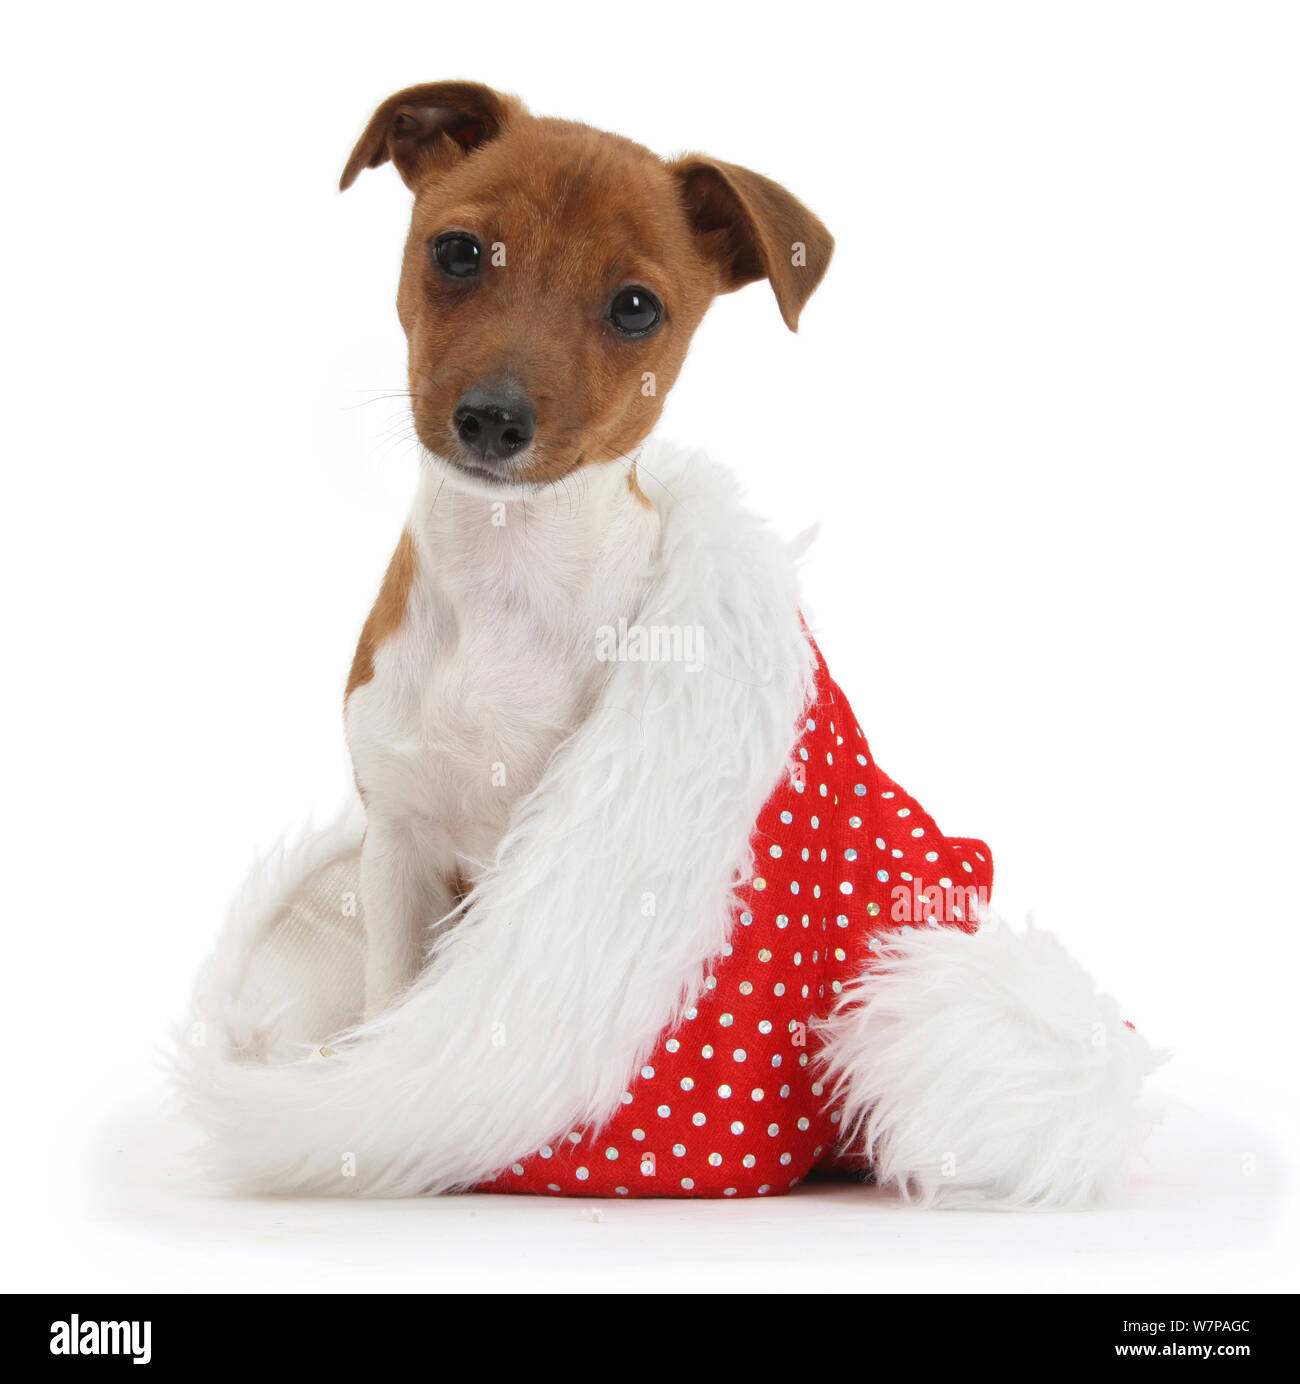 A Terrier Cross High Resolution Stock Photography and Images - Alamy